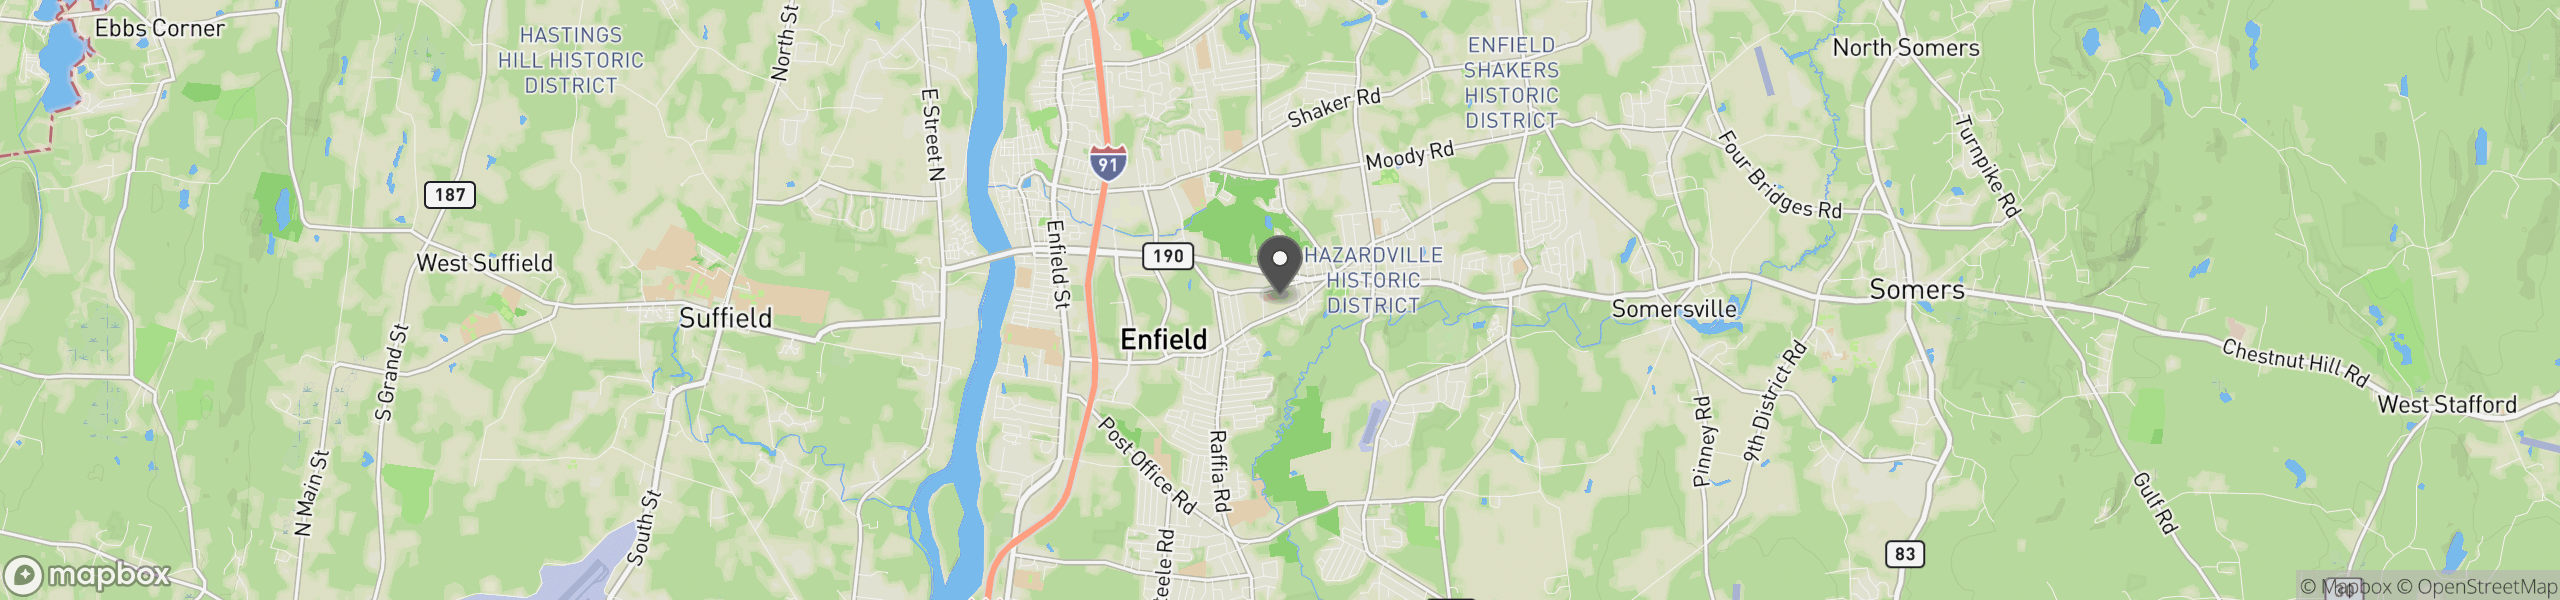 Enfield, CT